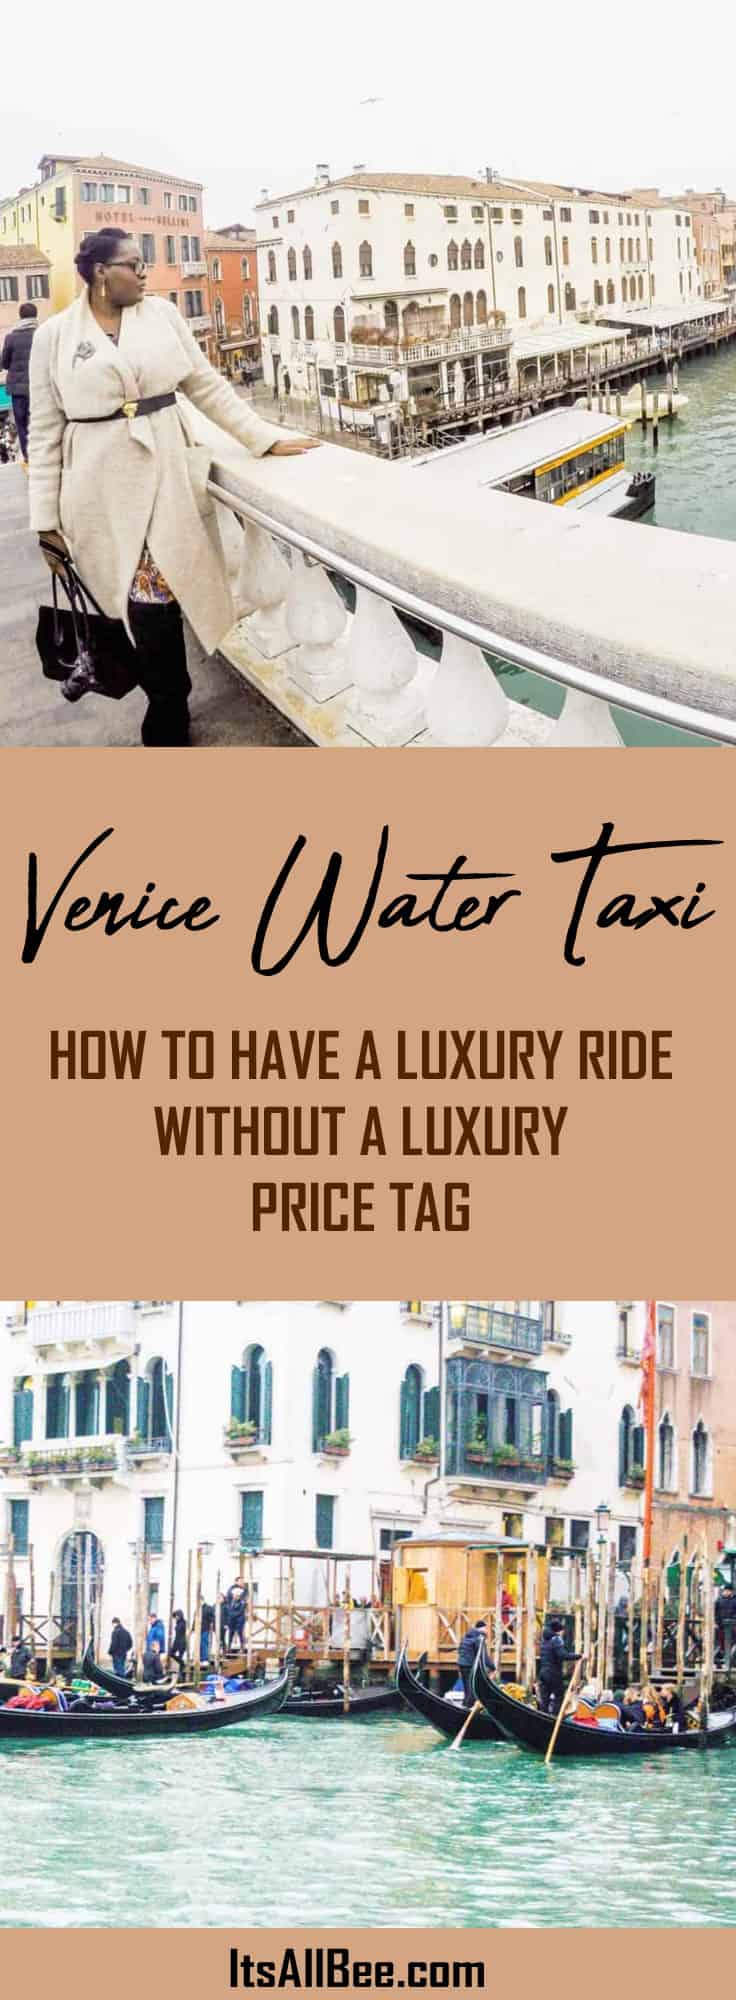 Venice Water Taxis On A Budget | Venice Water Taxi | How to Have a Luxury Ride Without a Luxury Price Tag - venice taxi boats #venice #italy #traveltip 